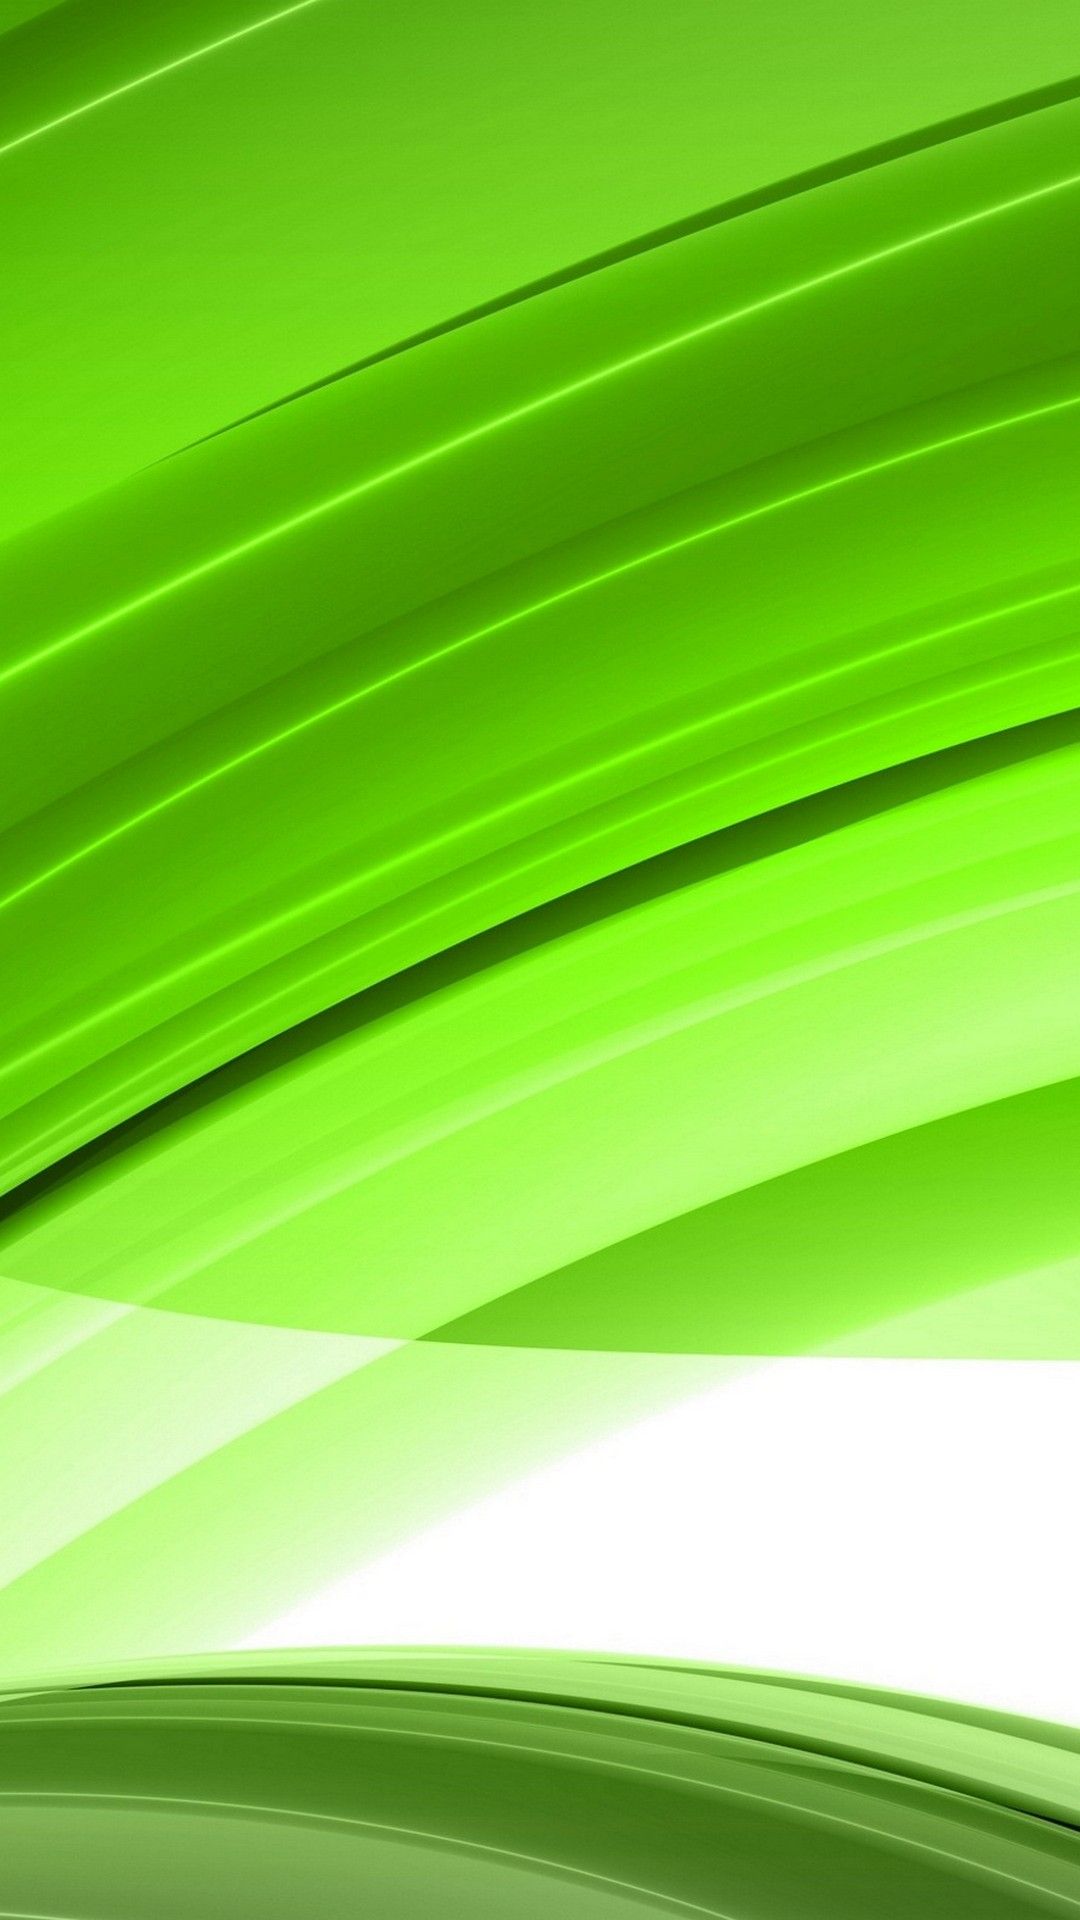 Wallpaper Android Light Green Android Wallpaper